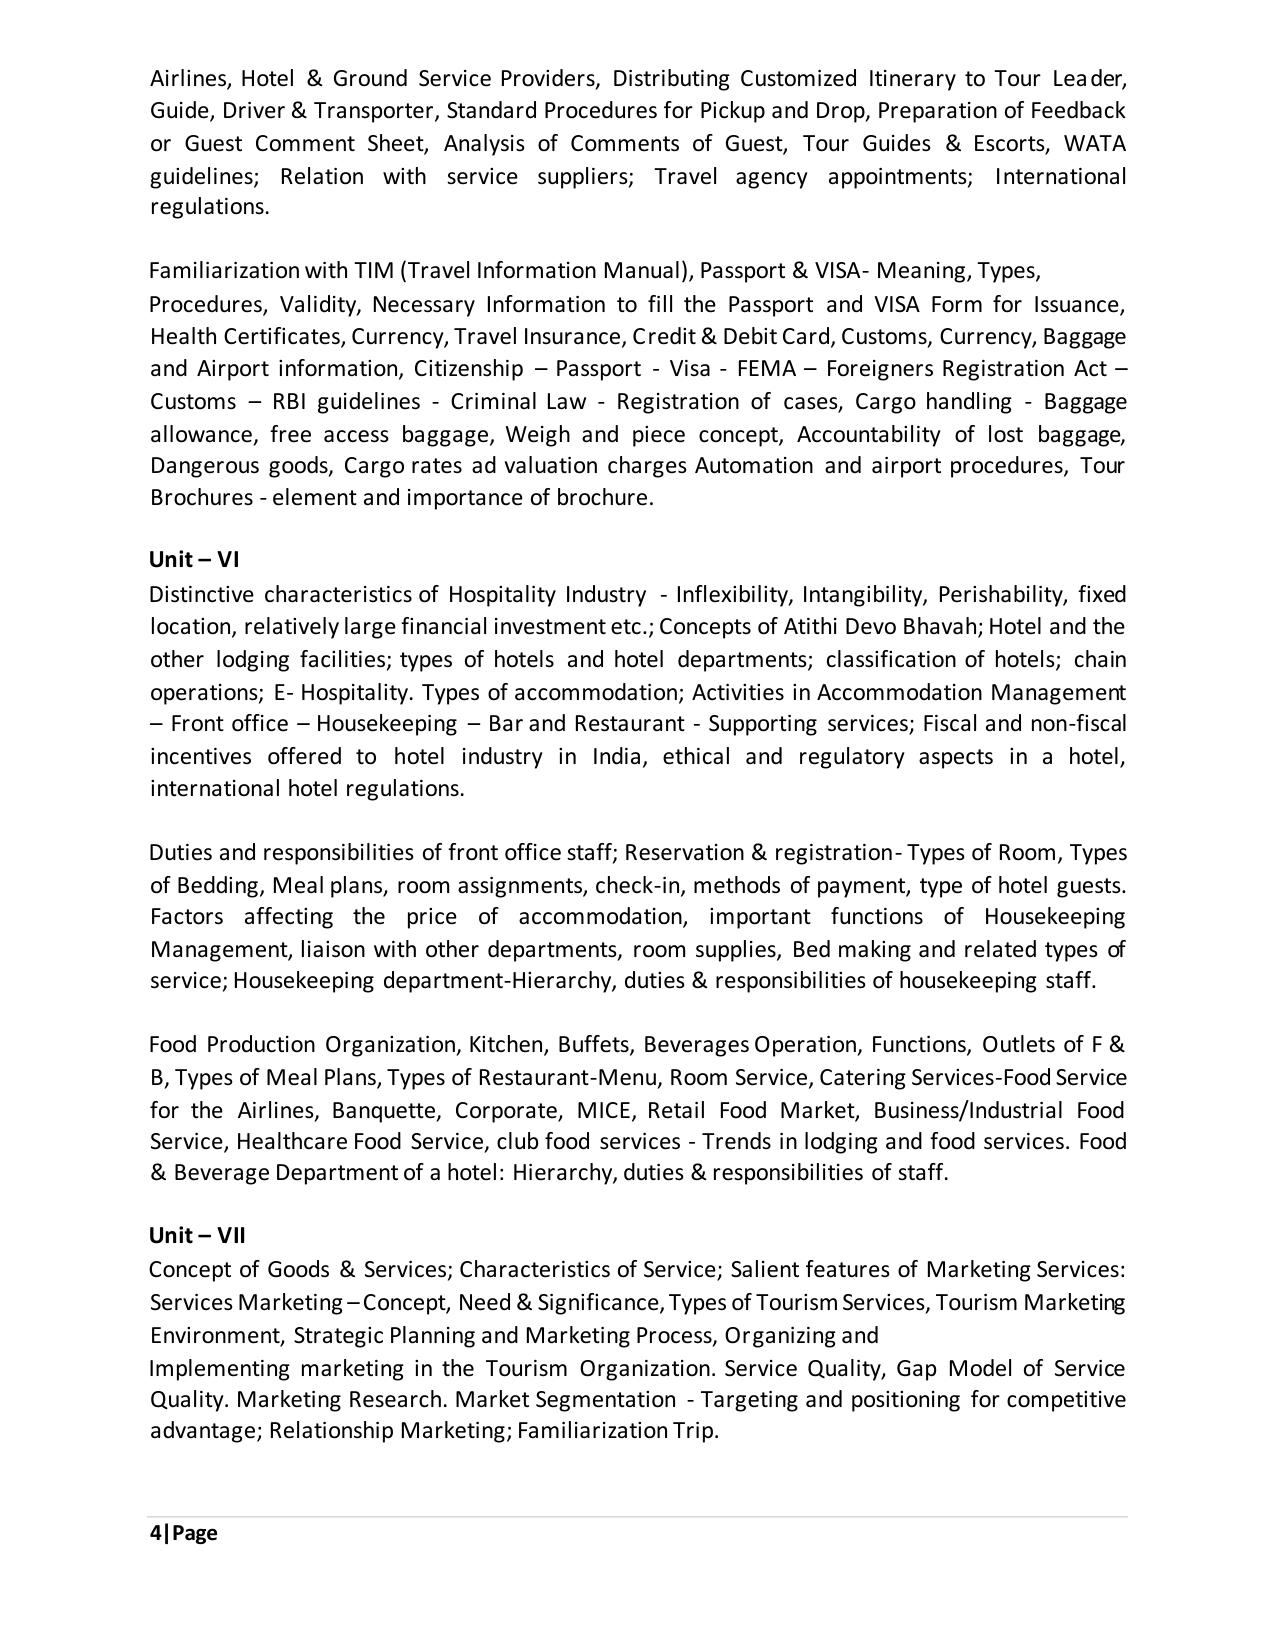 TNSET Syllabus - Tourism Administration and Management - Page 4